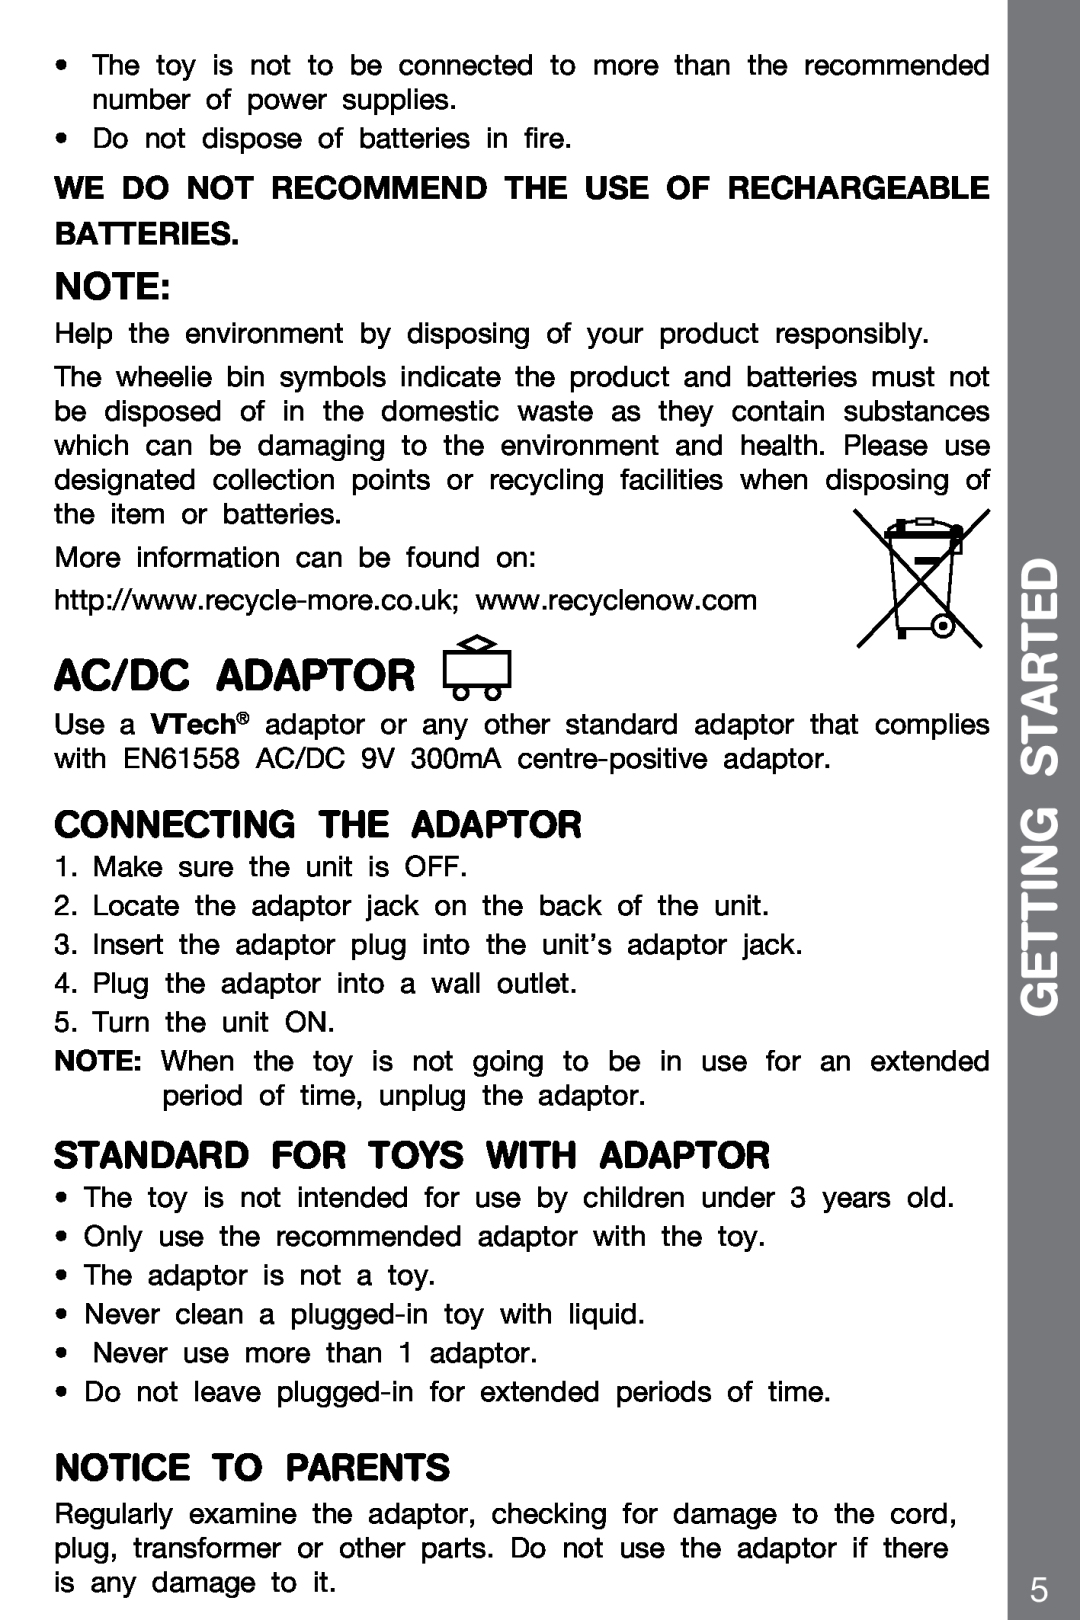 VTech 91-002136-014-000 Ac/Dc Adaptor, Connecting the adaptor, Standard for toys with adaptor, Notice to parents 